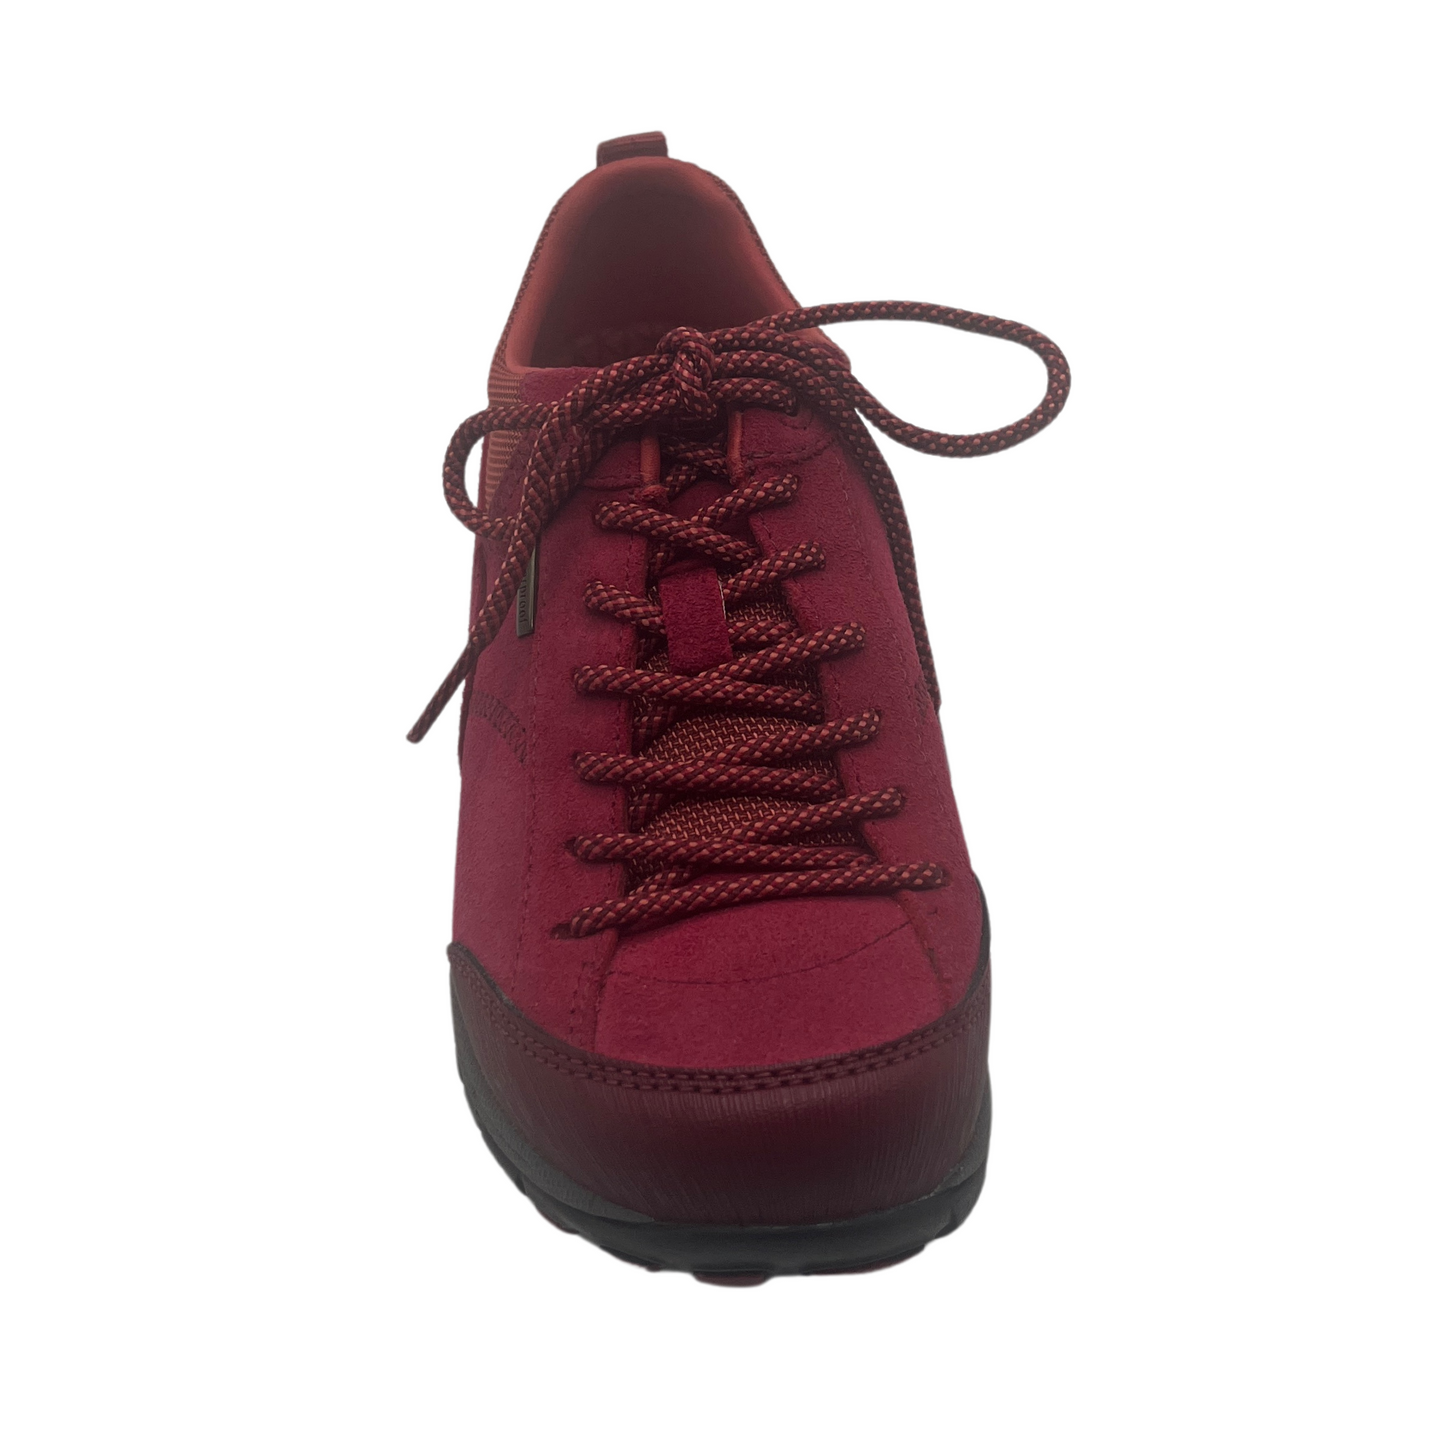 Top view of red hiking shoe with matching laces and black rubber outsole